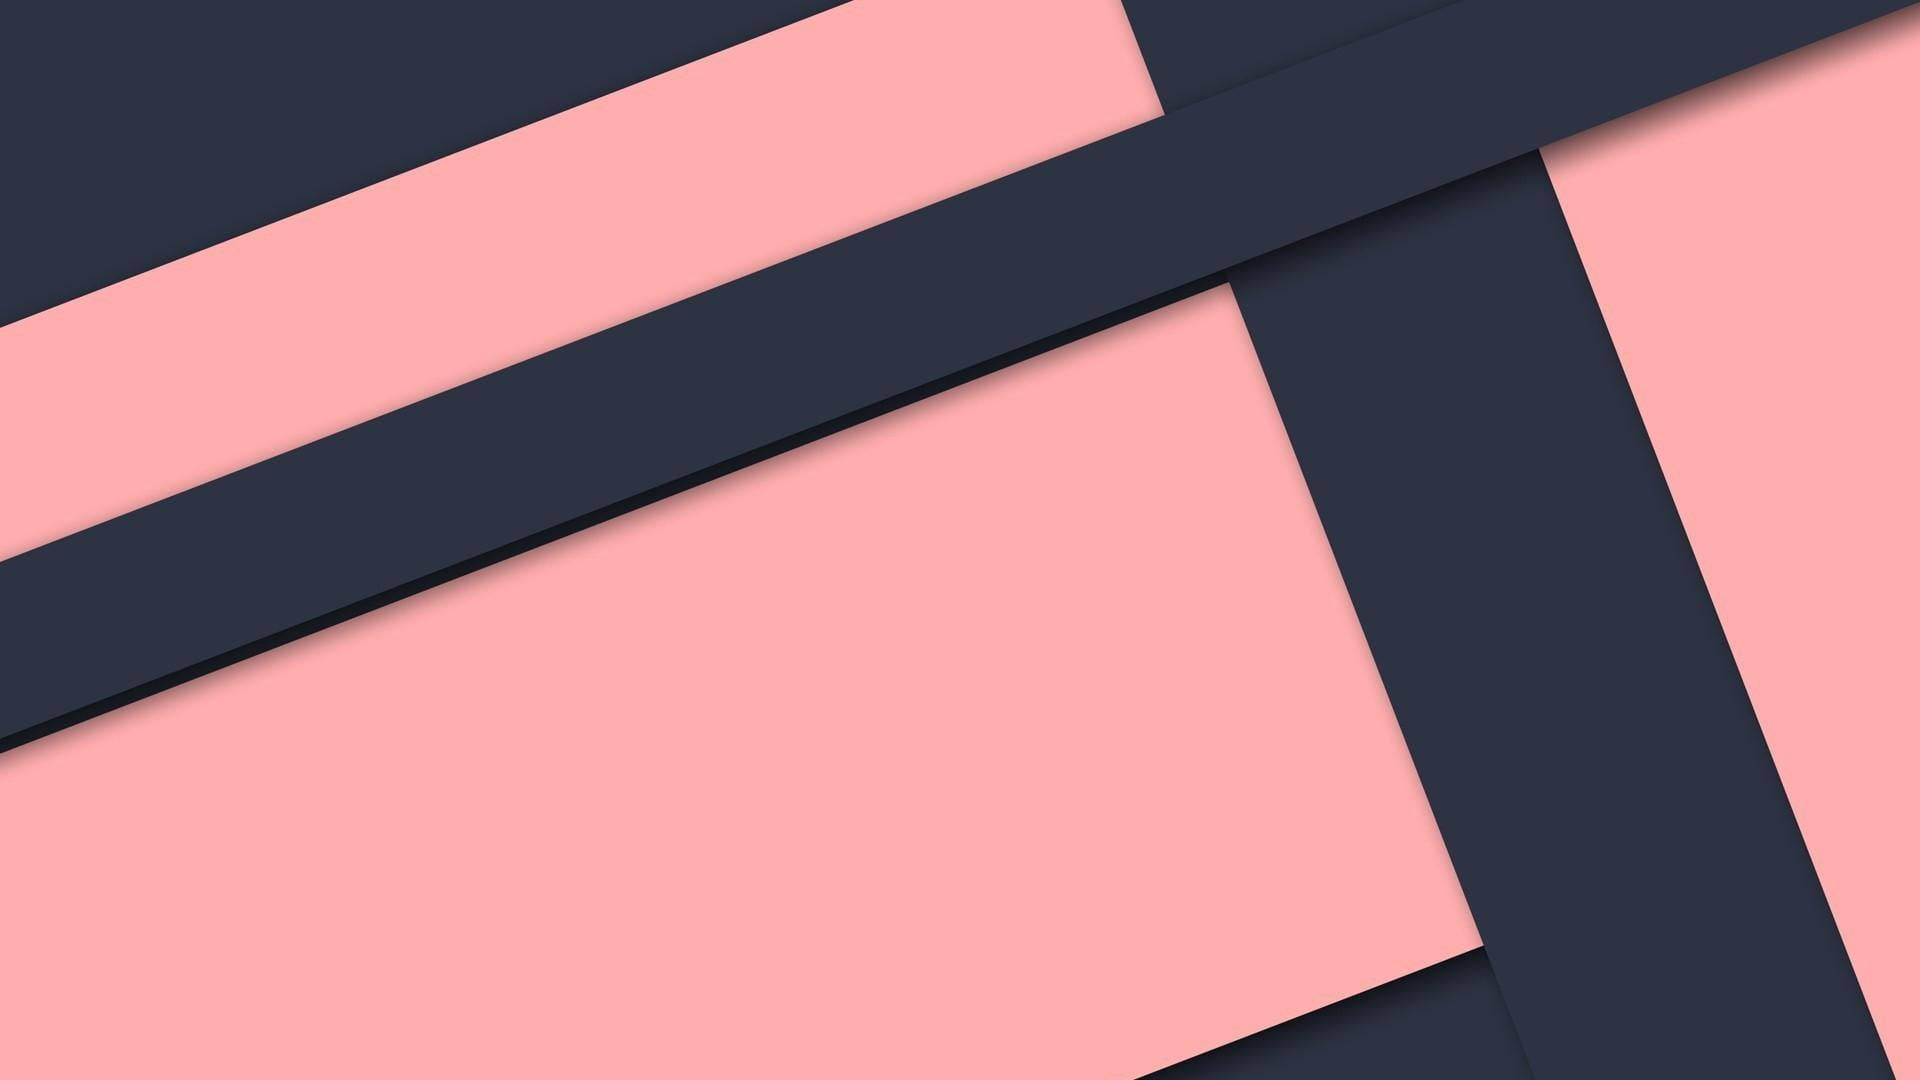 Black And Pink Aesthetic Material Design Background